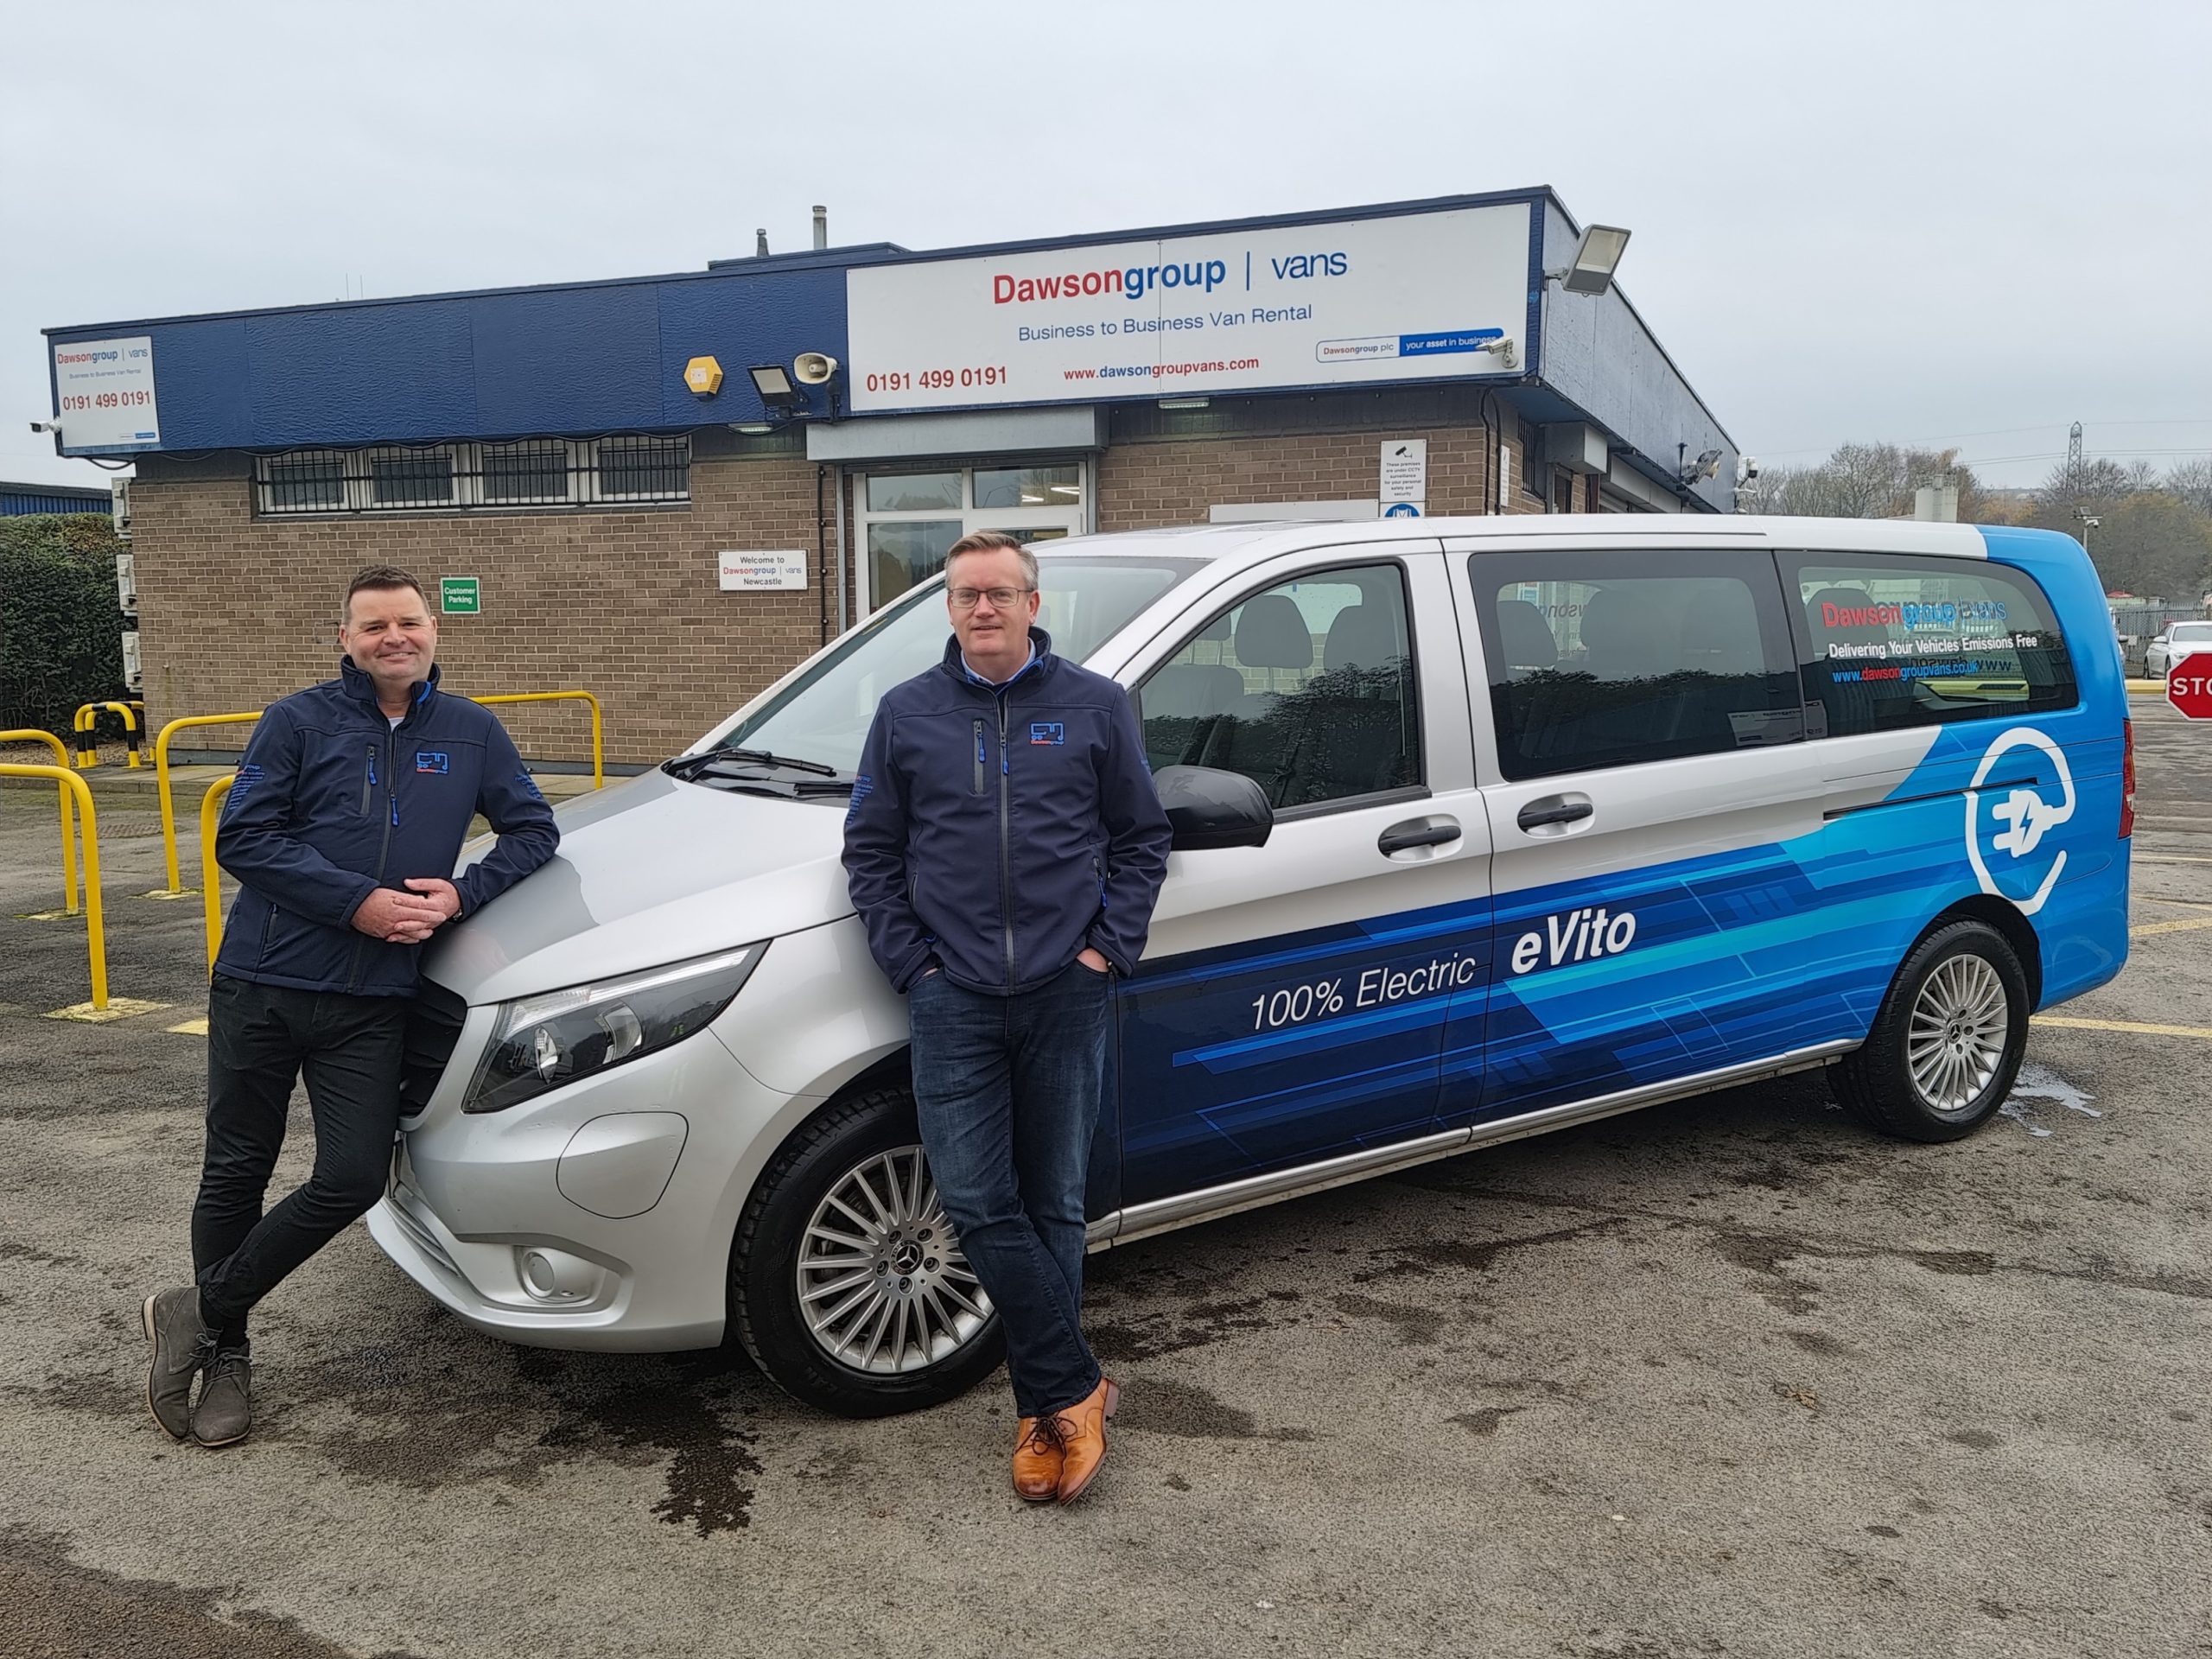 Mark Dixon and Trevor Mewes standing in front of evito van and Dawsongroup branch